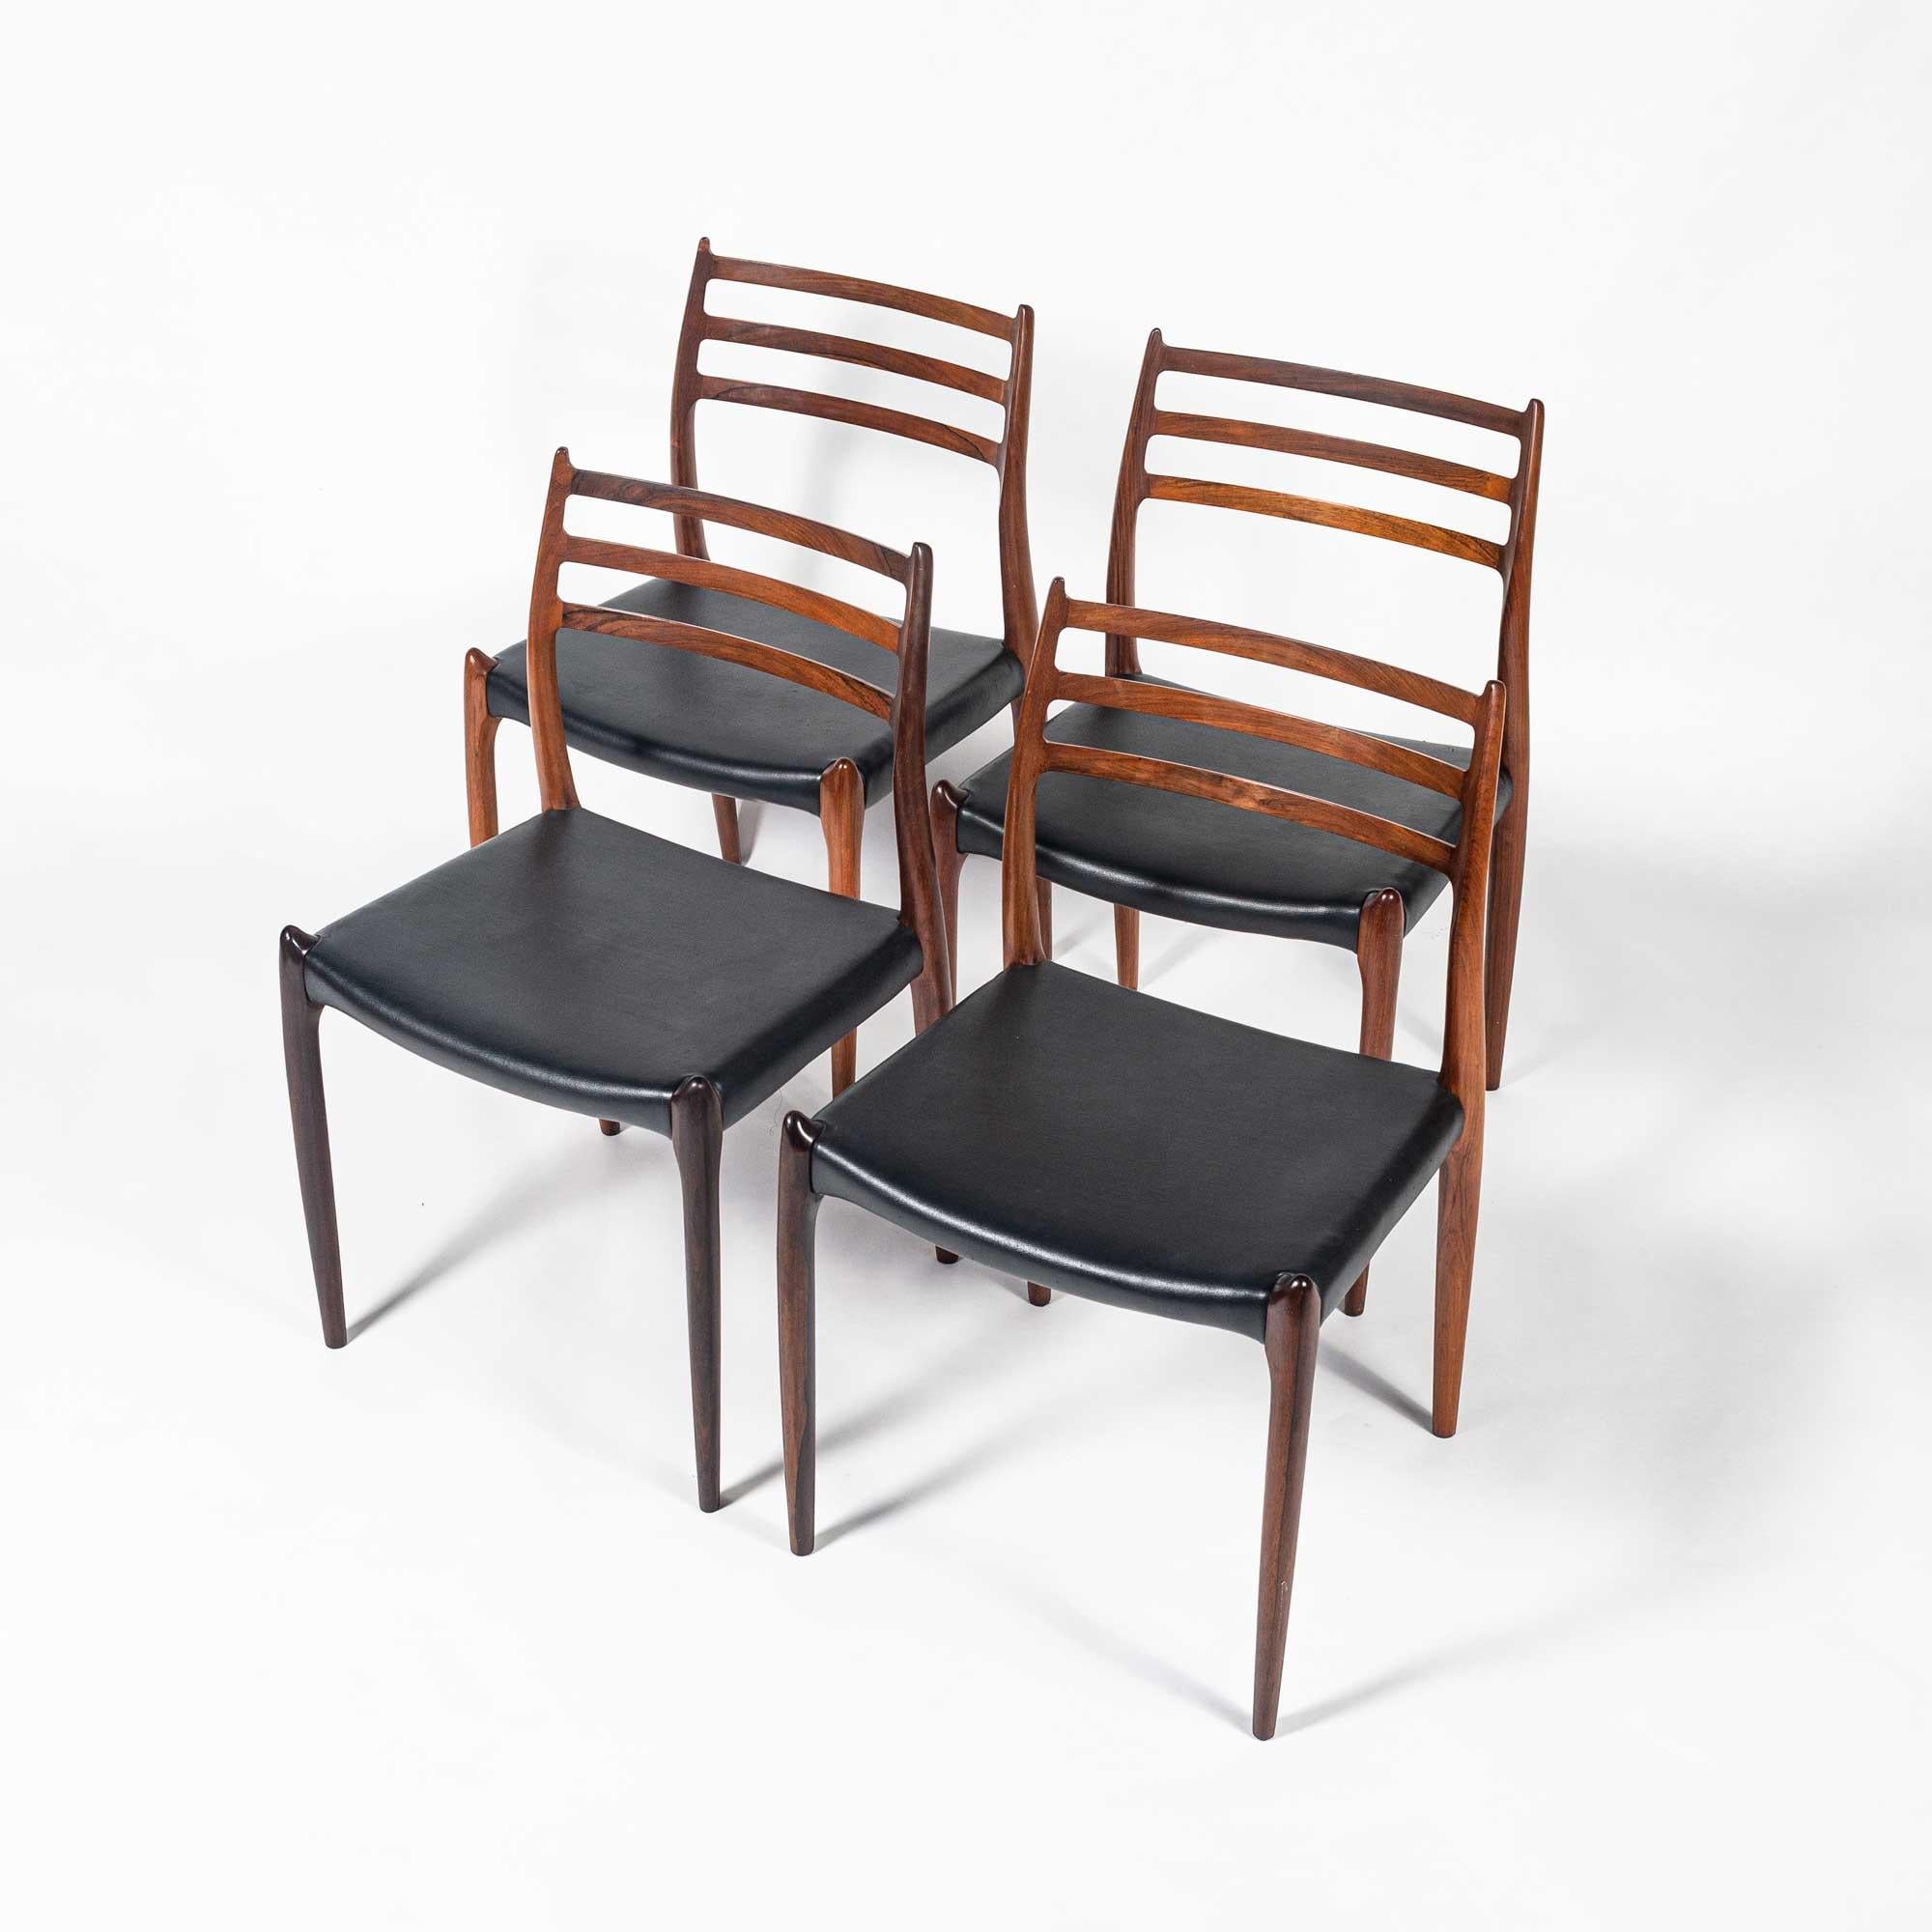 Rare and iconic set of for rosewood dining chairs model 78, designed by Niels Otto Moller for JL Møller Møbelfabrik in 1954. This set is in original condition, with original black leather seat. Label are on all chairs.

The set is in great vintage